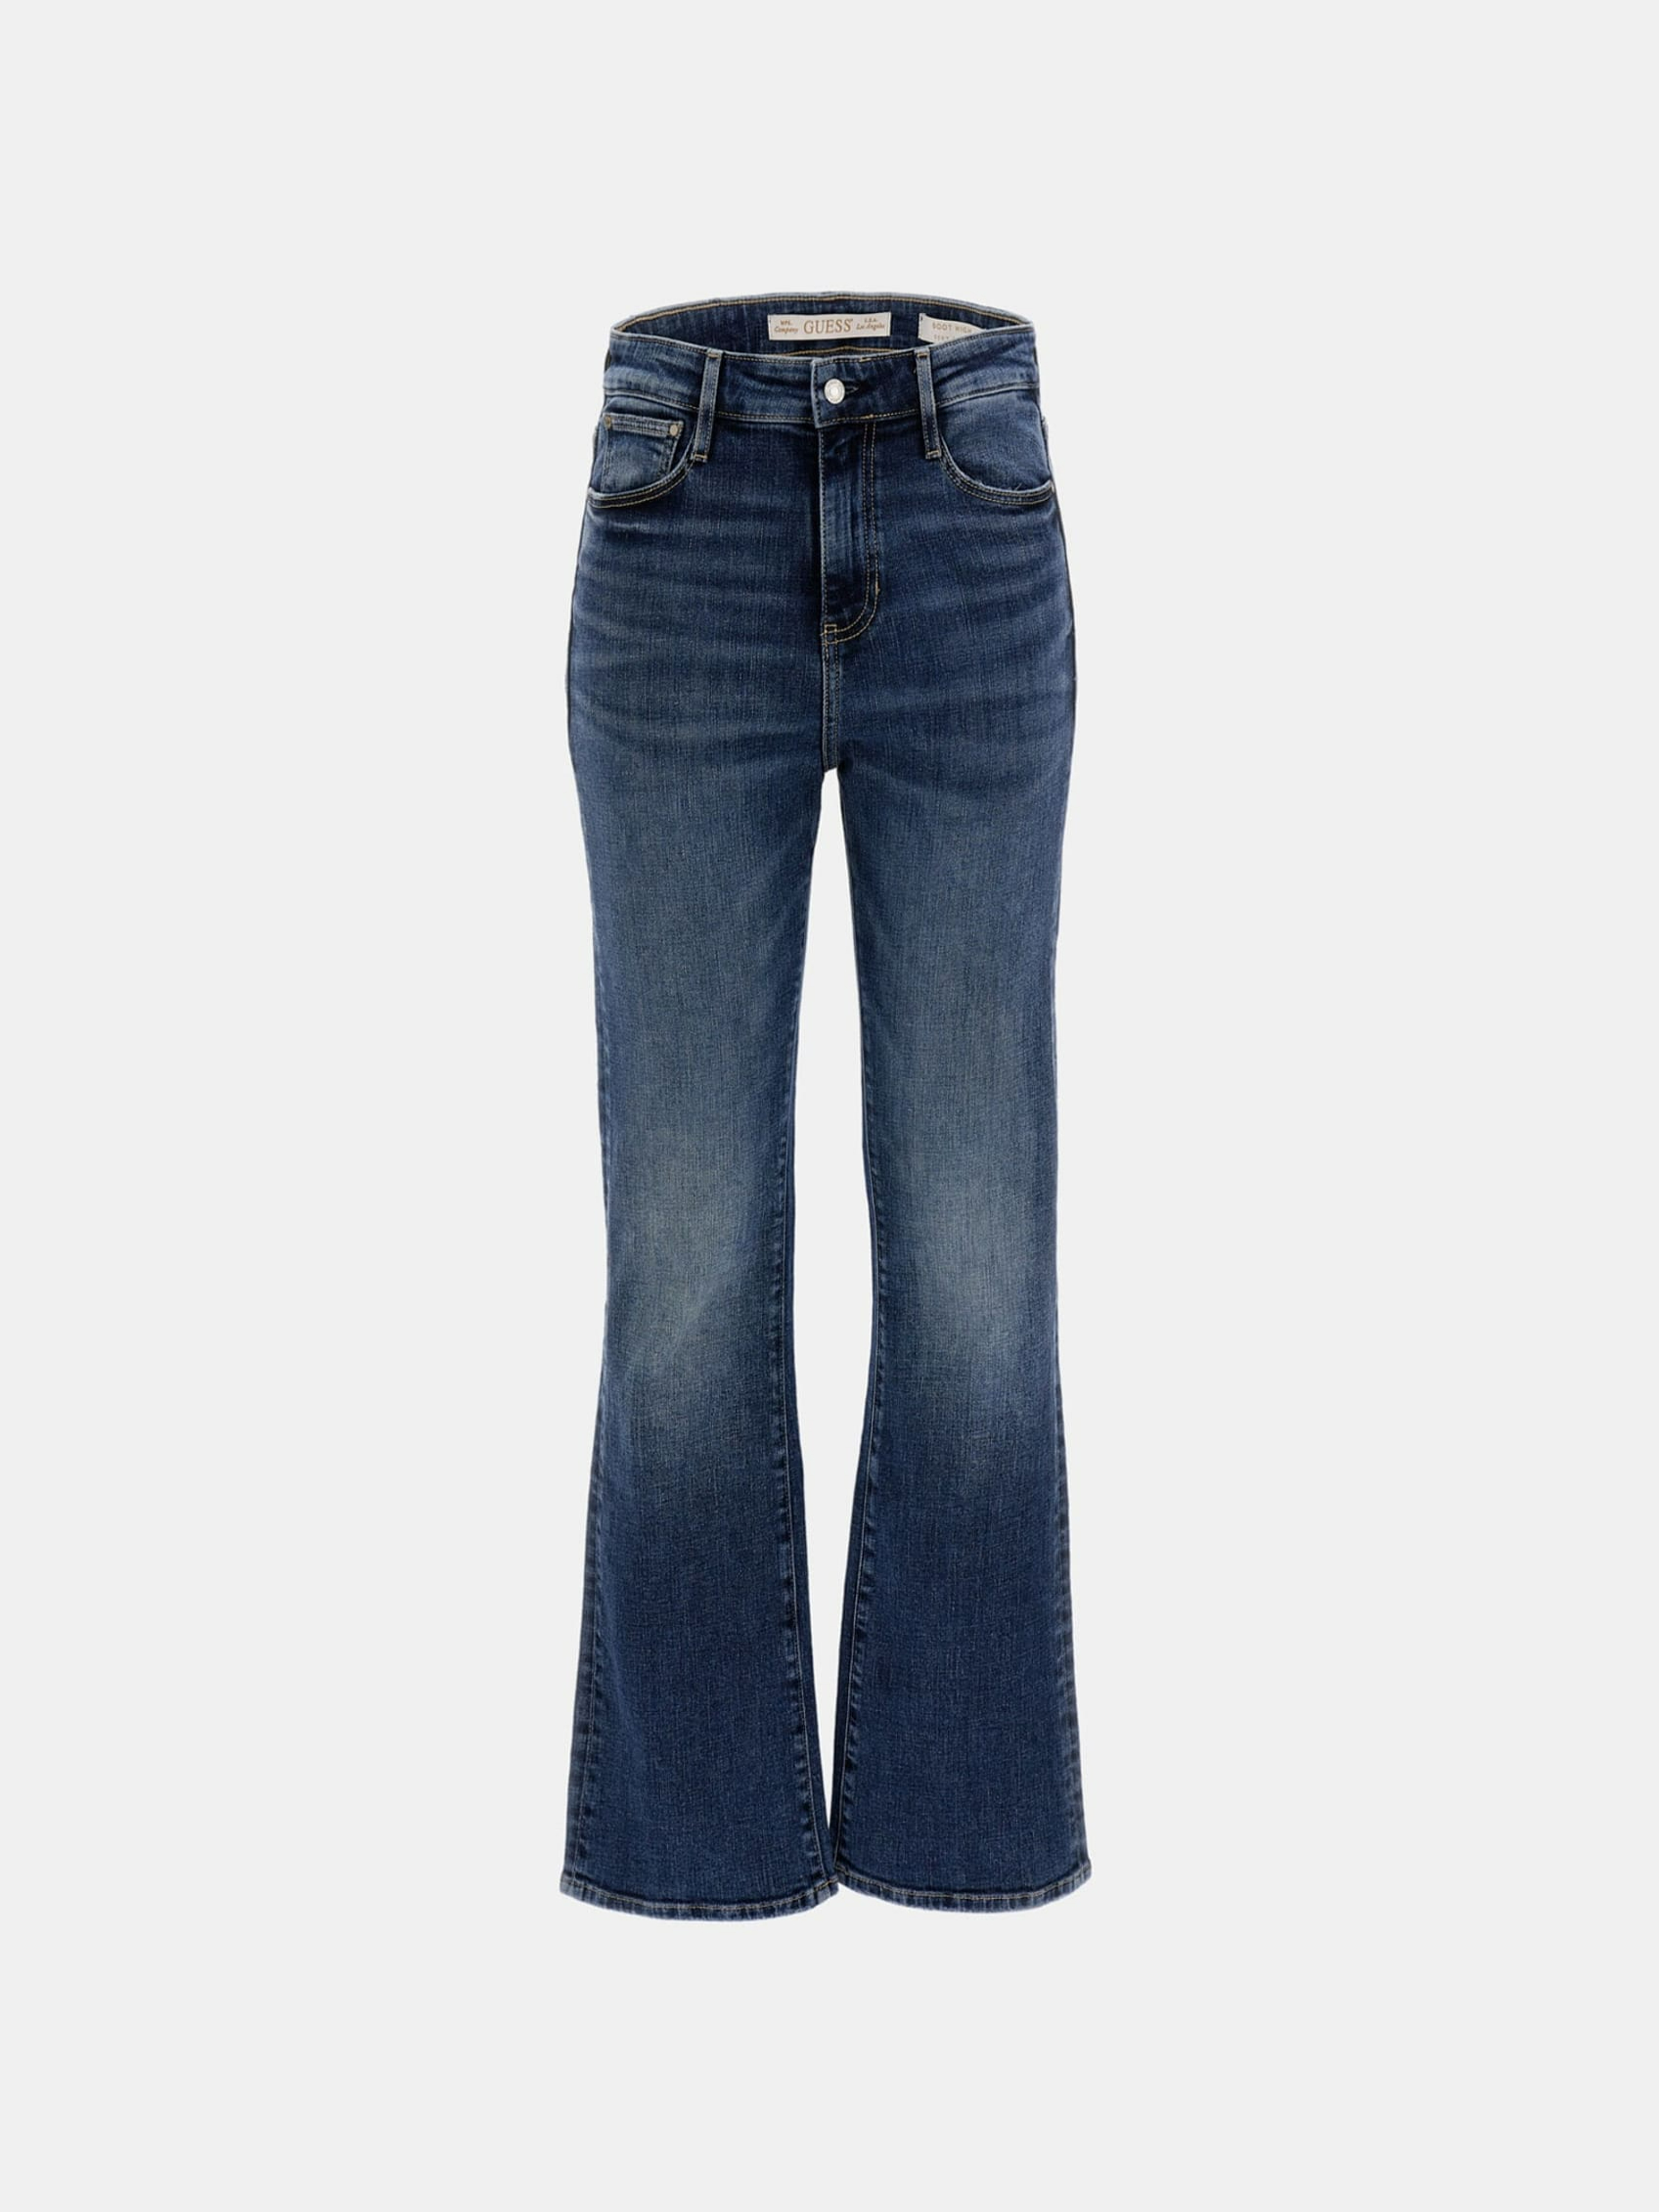 ECO HIGH RISE FLARE DENIM PANTS | Guess Philippines